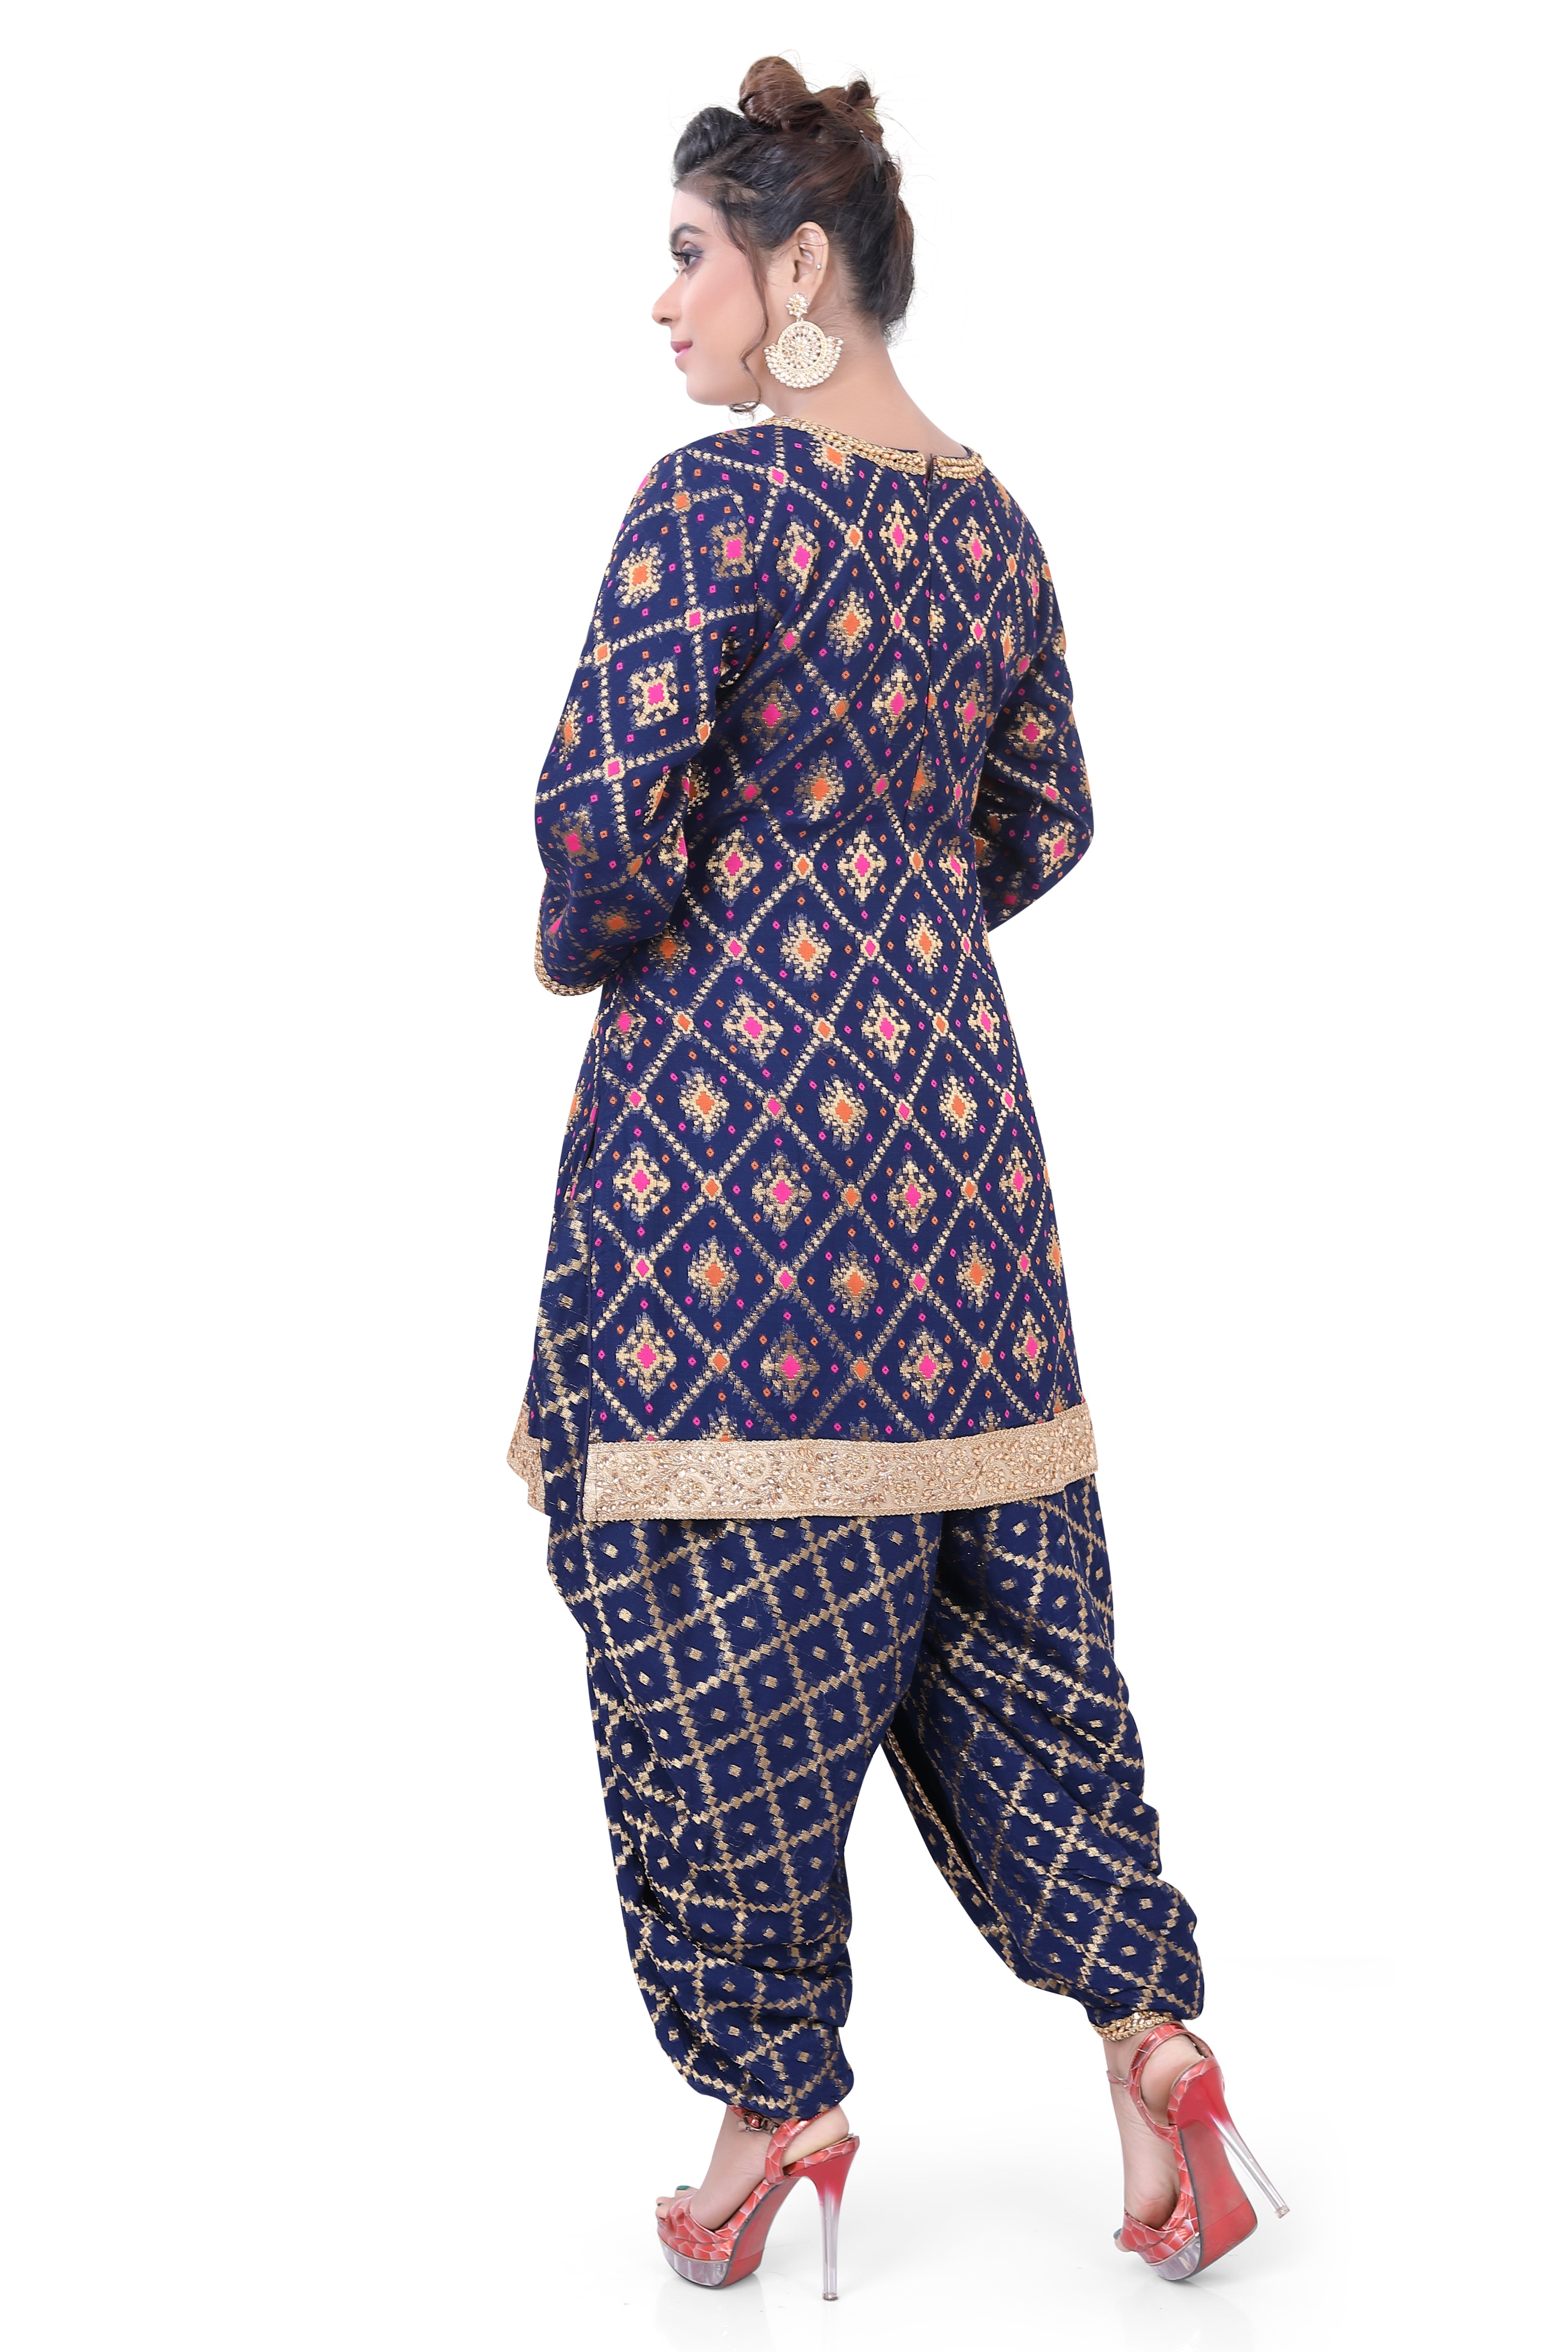 Blue Butti Top Dhoti Suit